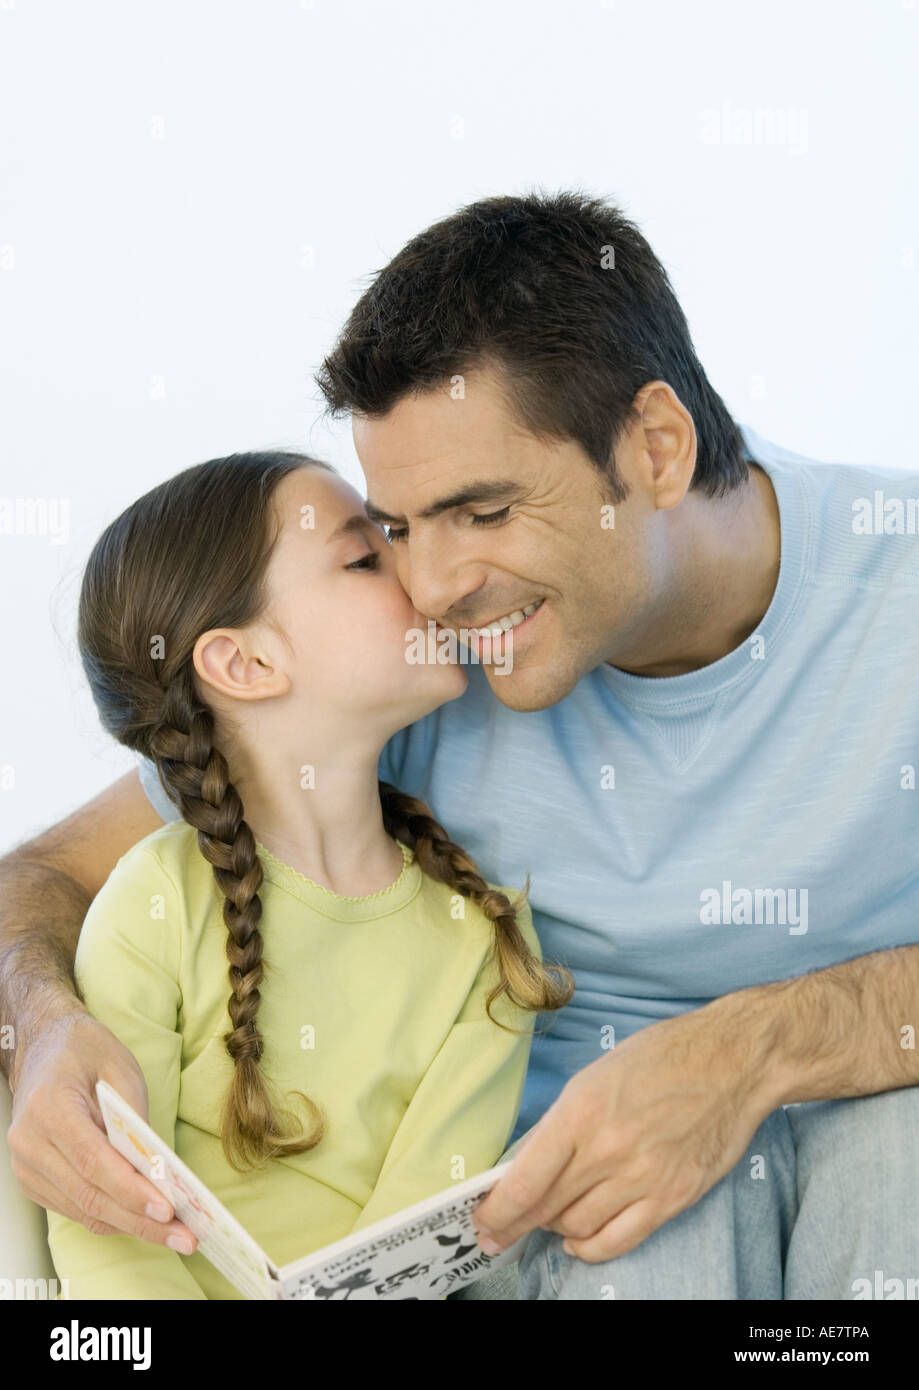 Girl kissing father's cheek while he holds book Stock Photo